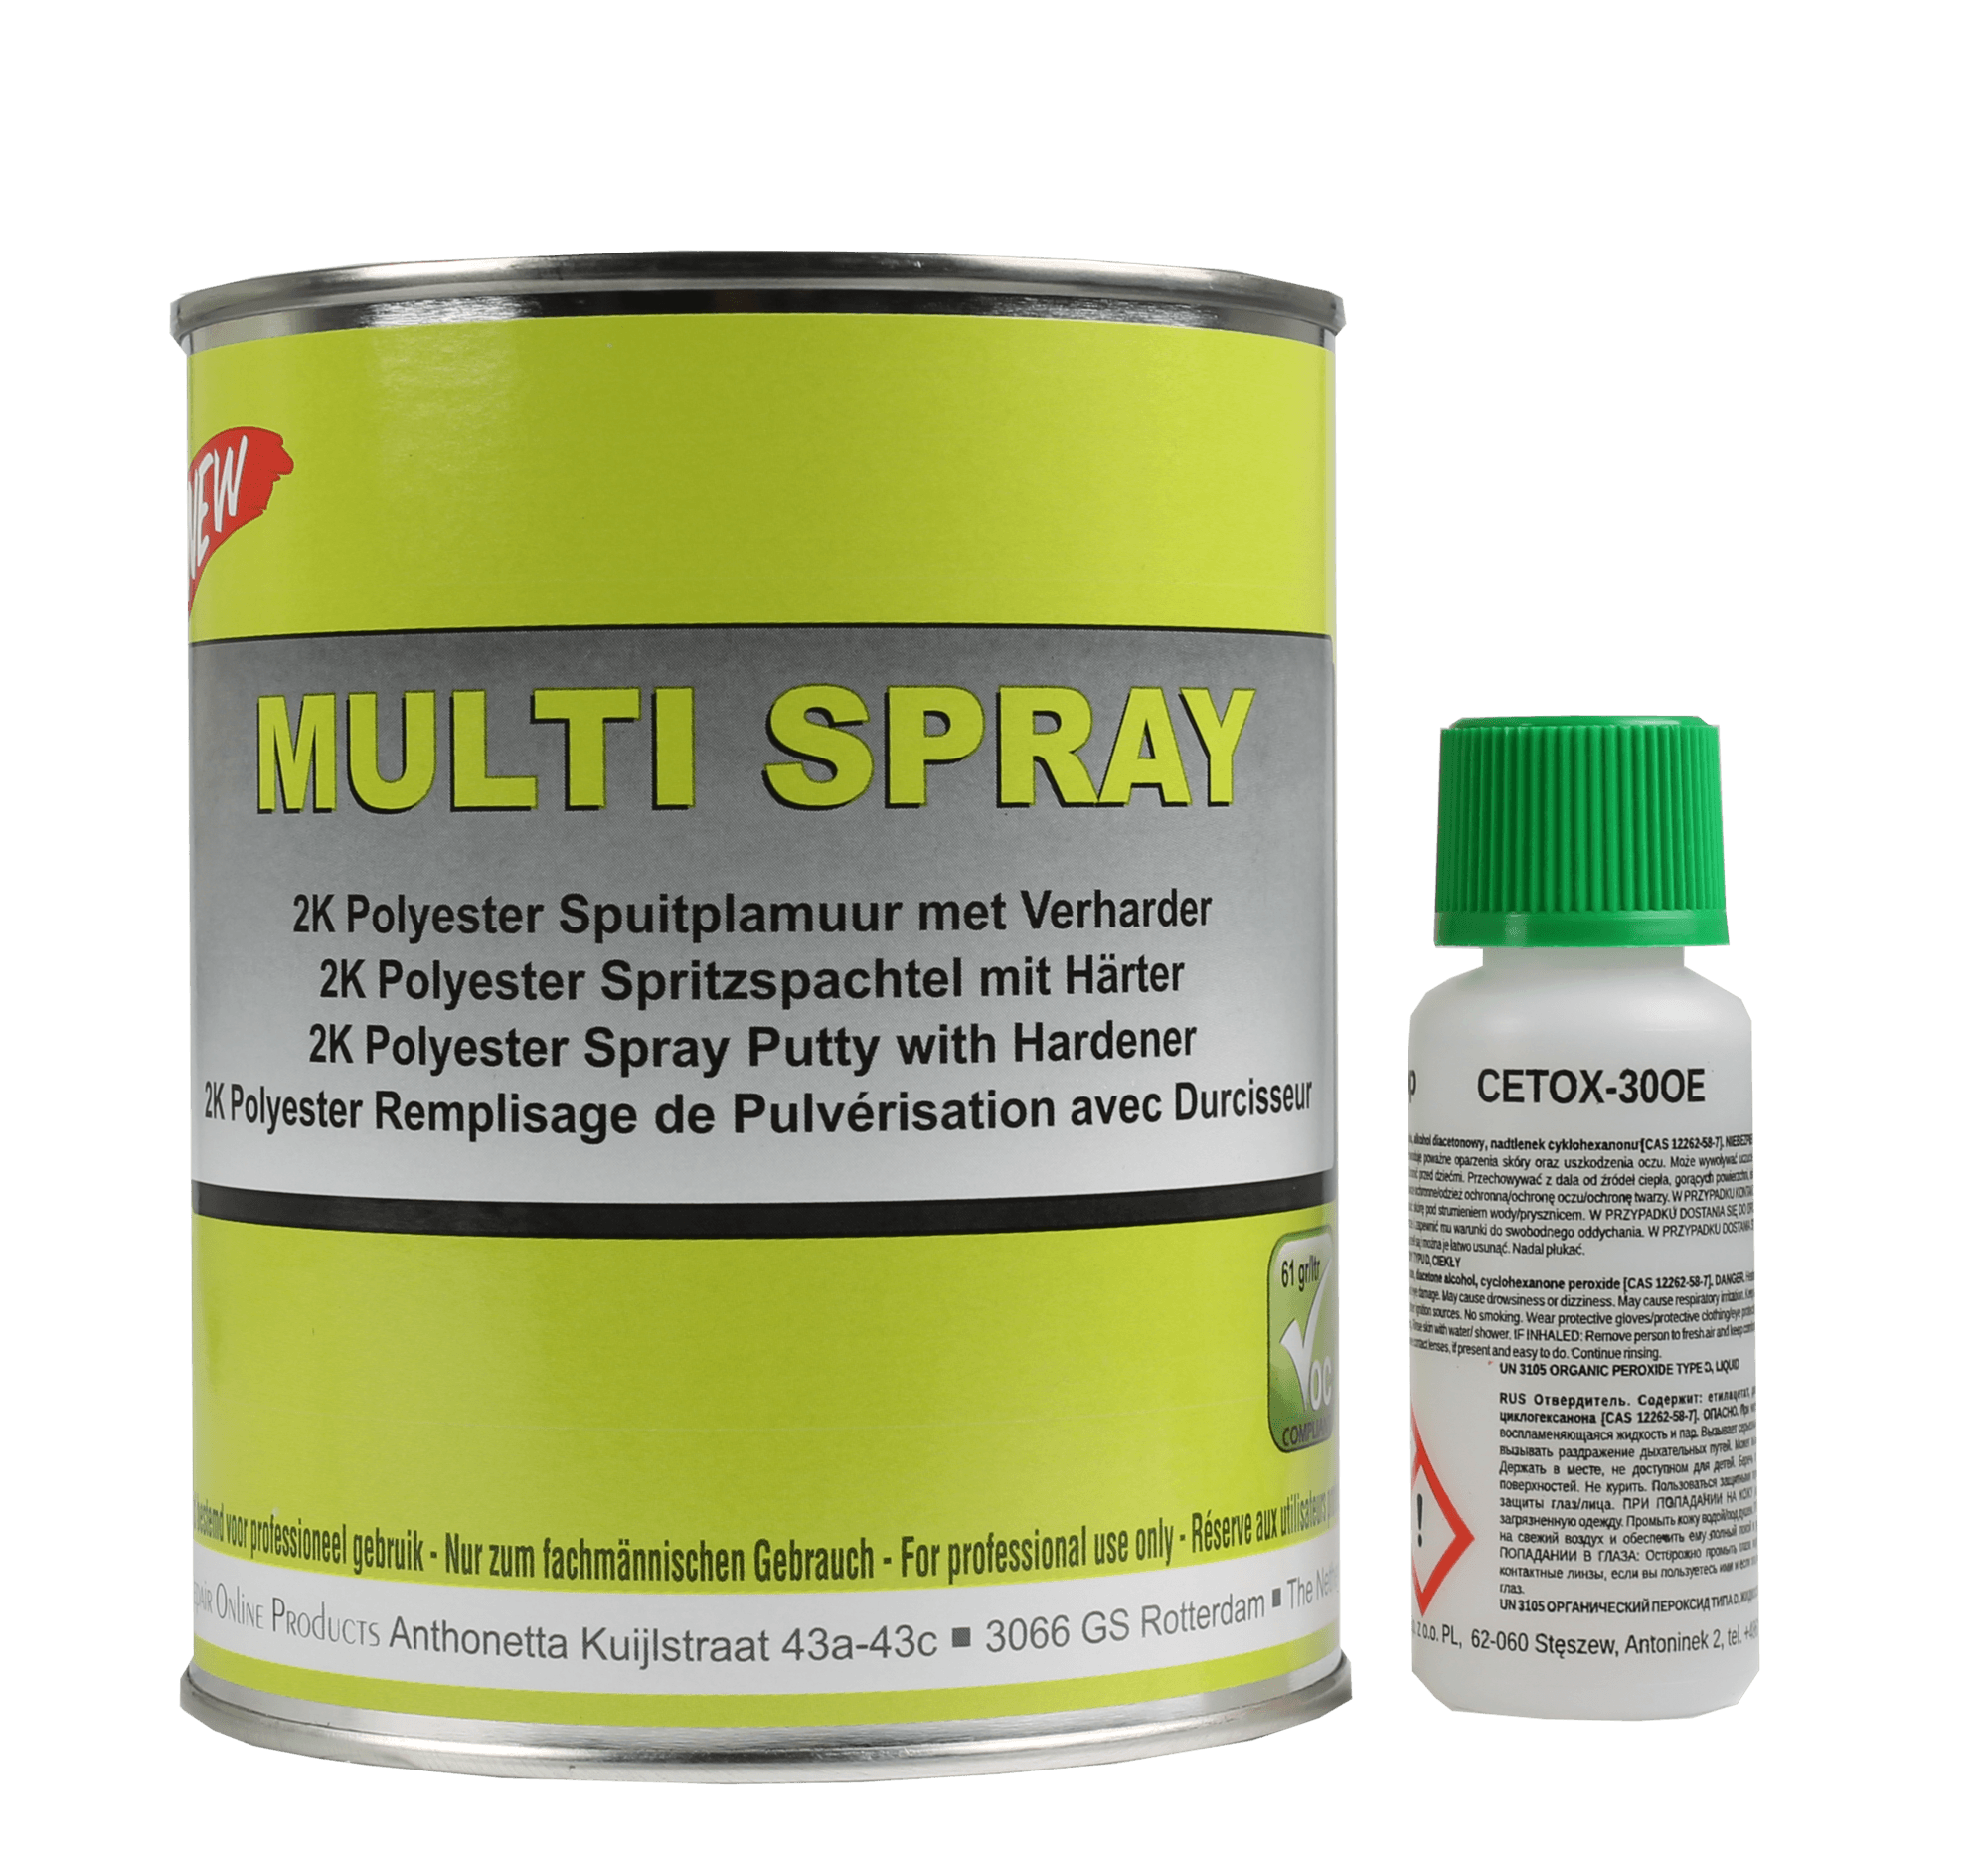 Rustoleum High Heat Paint Awesome 2k Polyester Spray Filler with Hardener Multi Spray